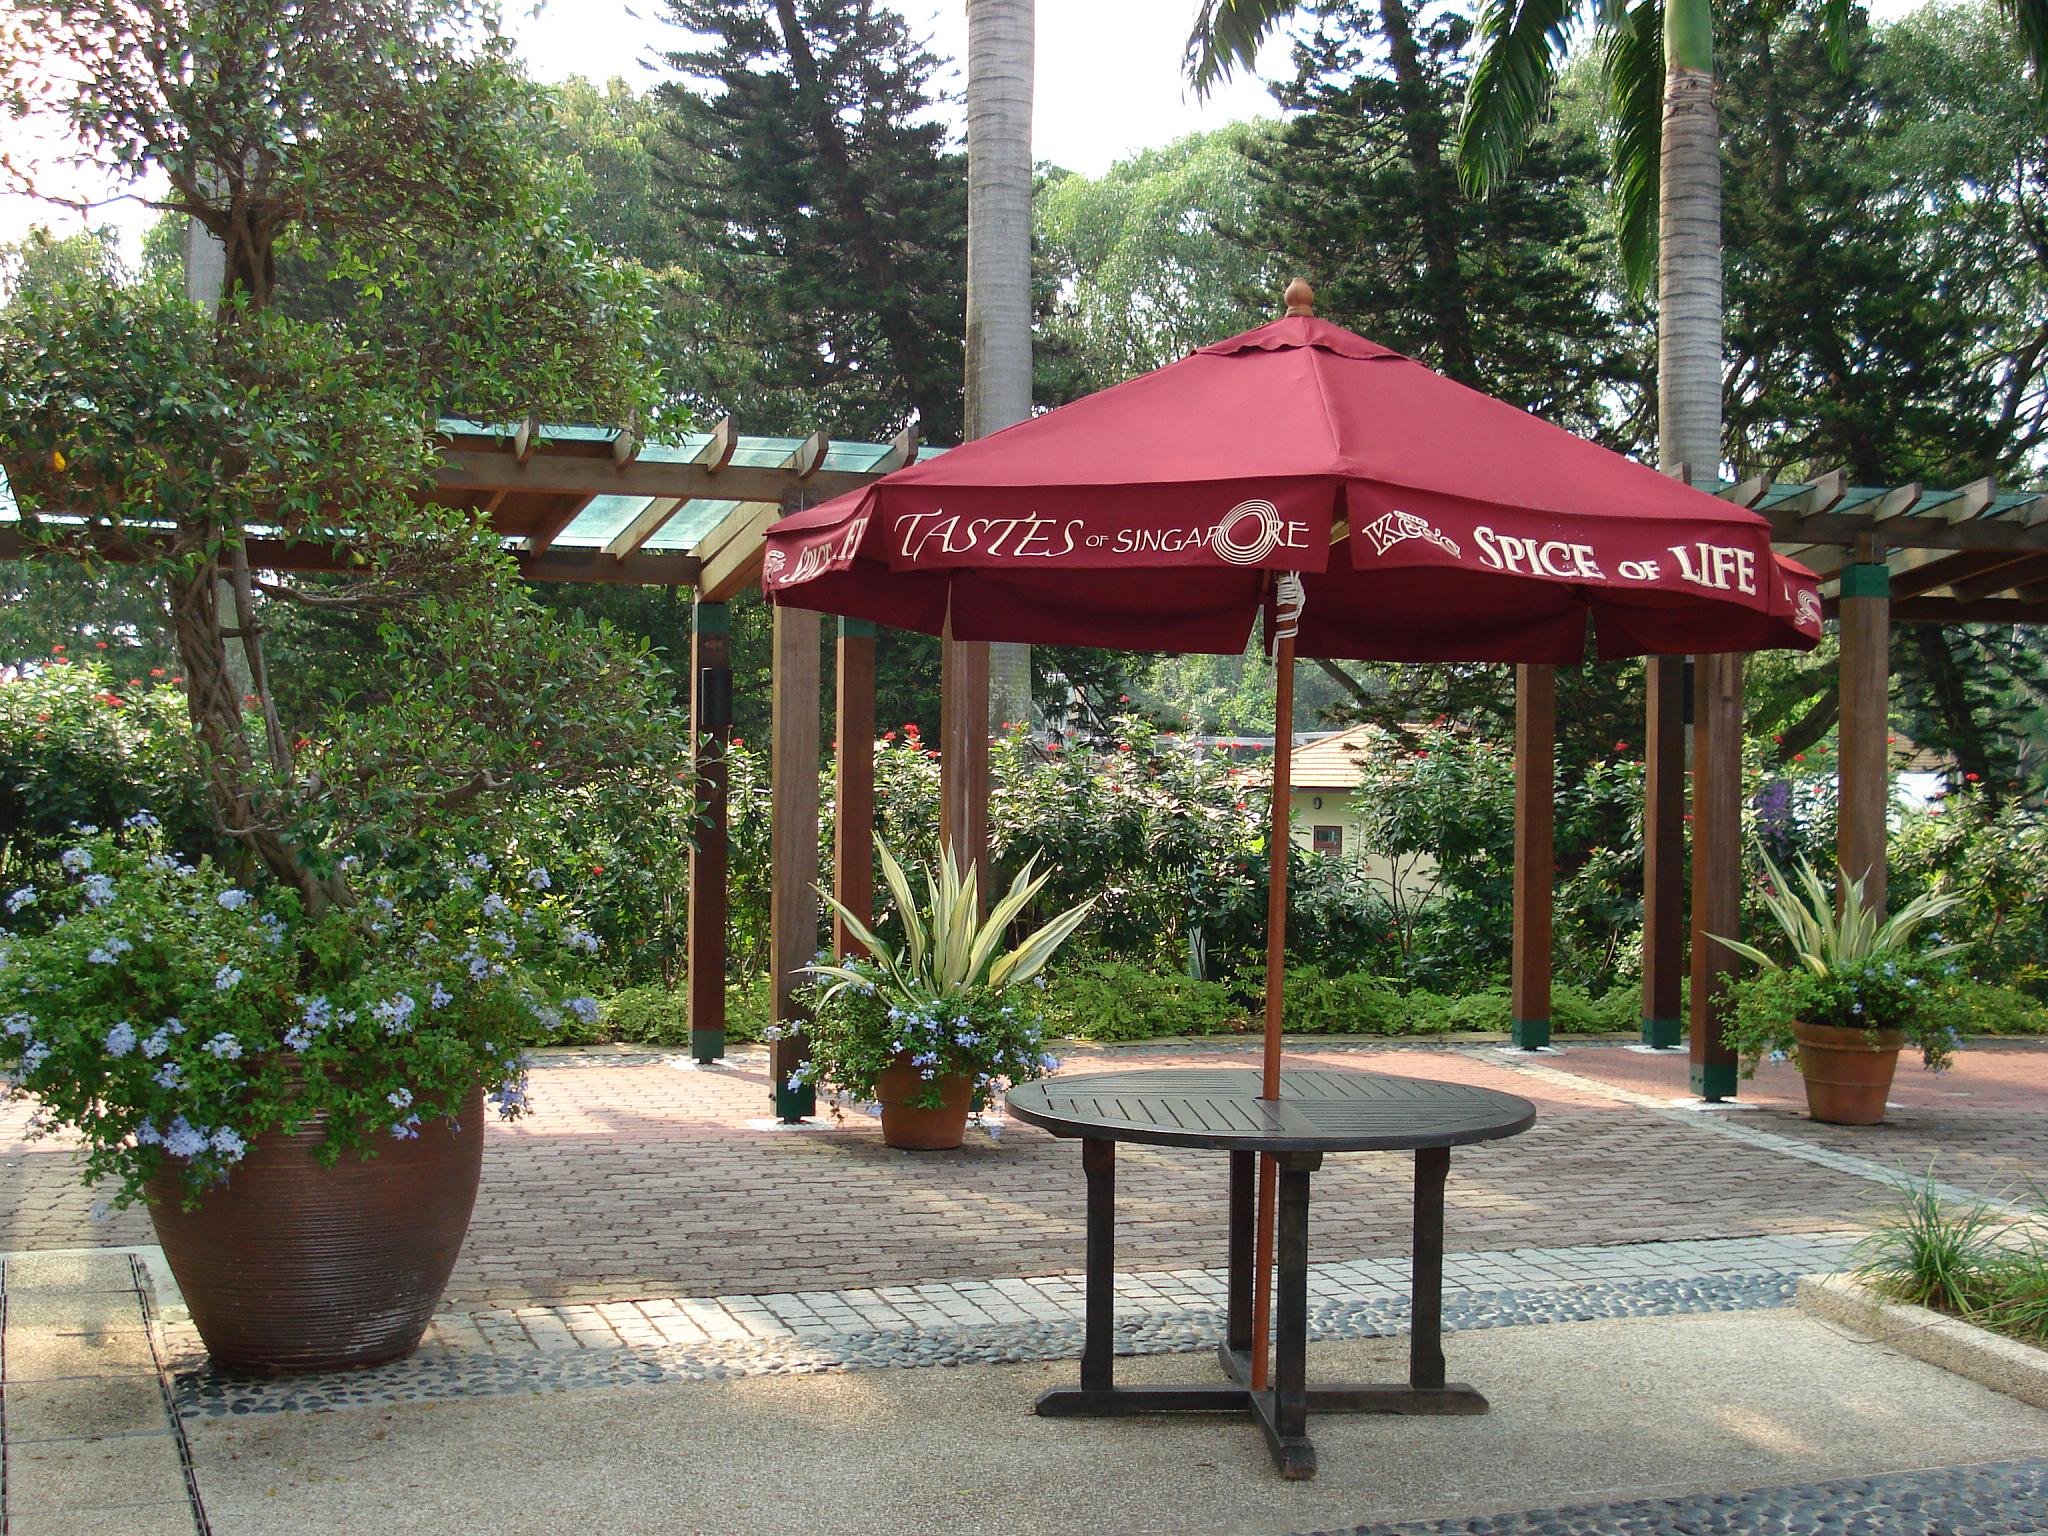 a small patio with table and umbrella for shade